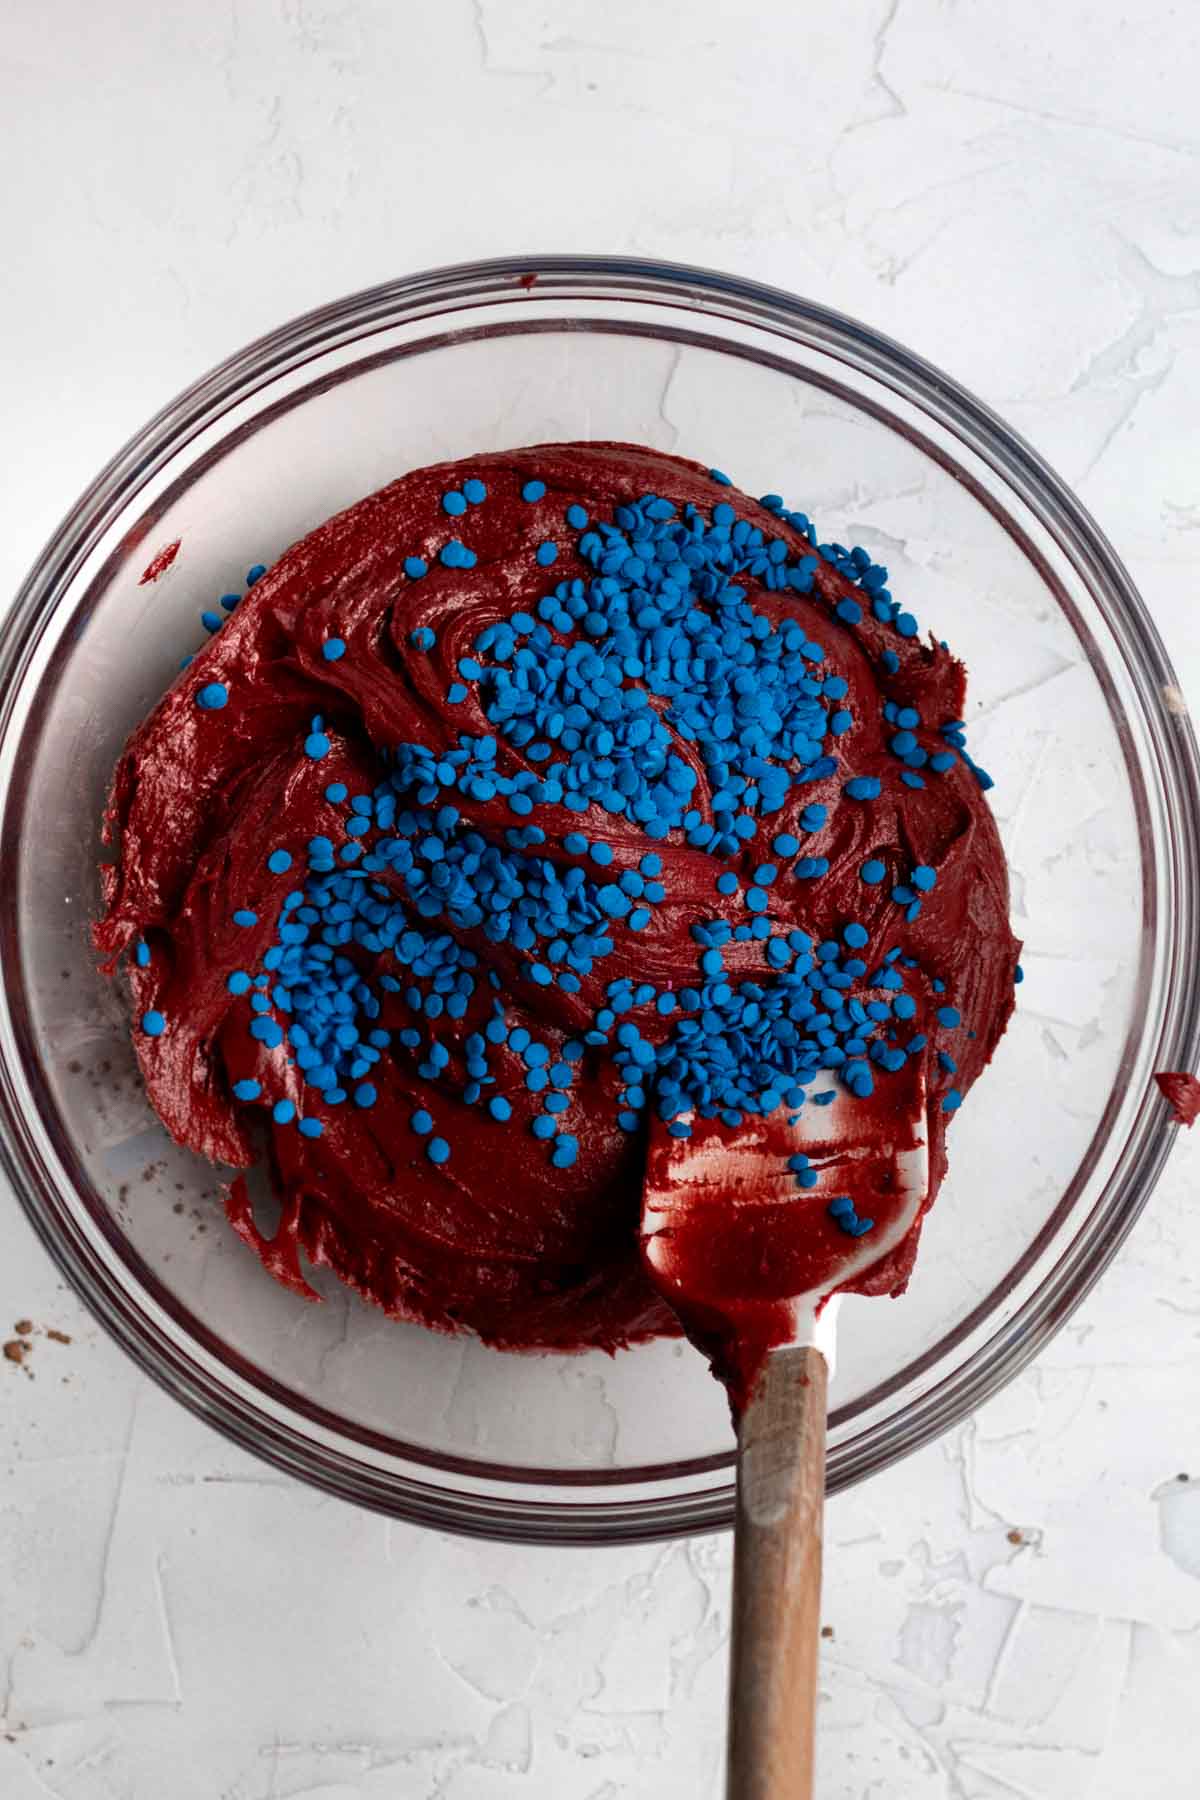 Mixing in hundreds of tiny round blue sprinkles into the batter.